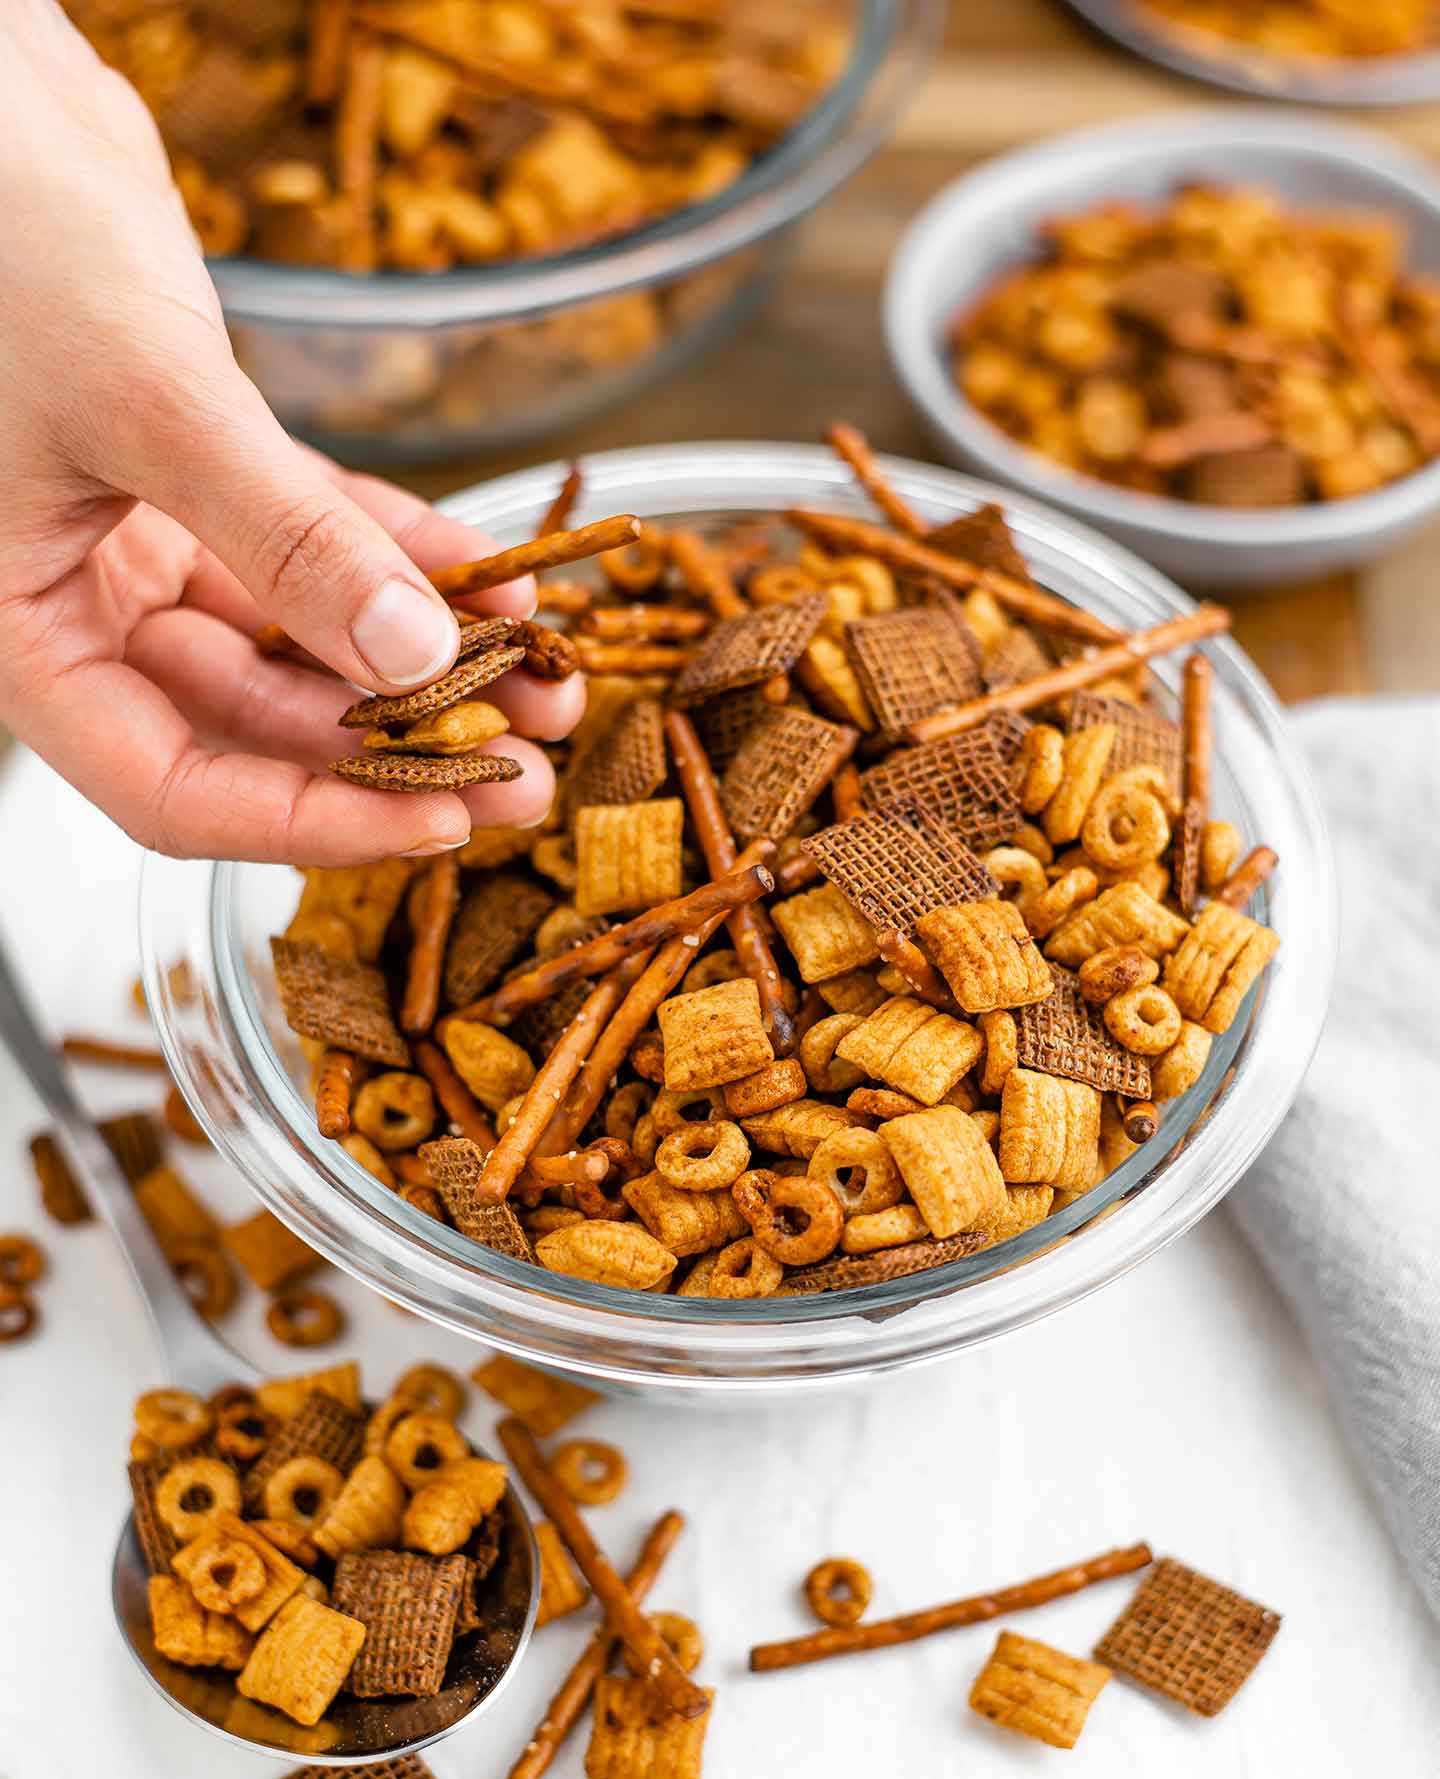 Side view of hand holding pretzels sticks and pieces of cereal from an overflowing bowl of toasty vegan party mix.